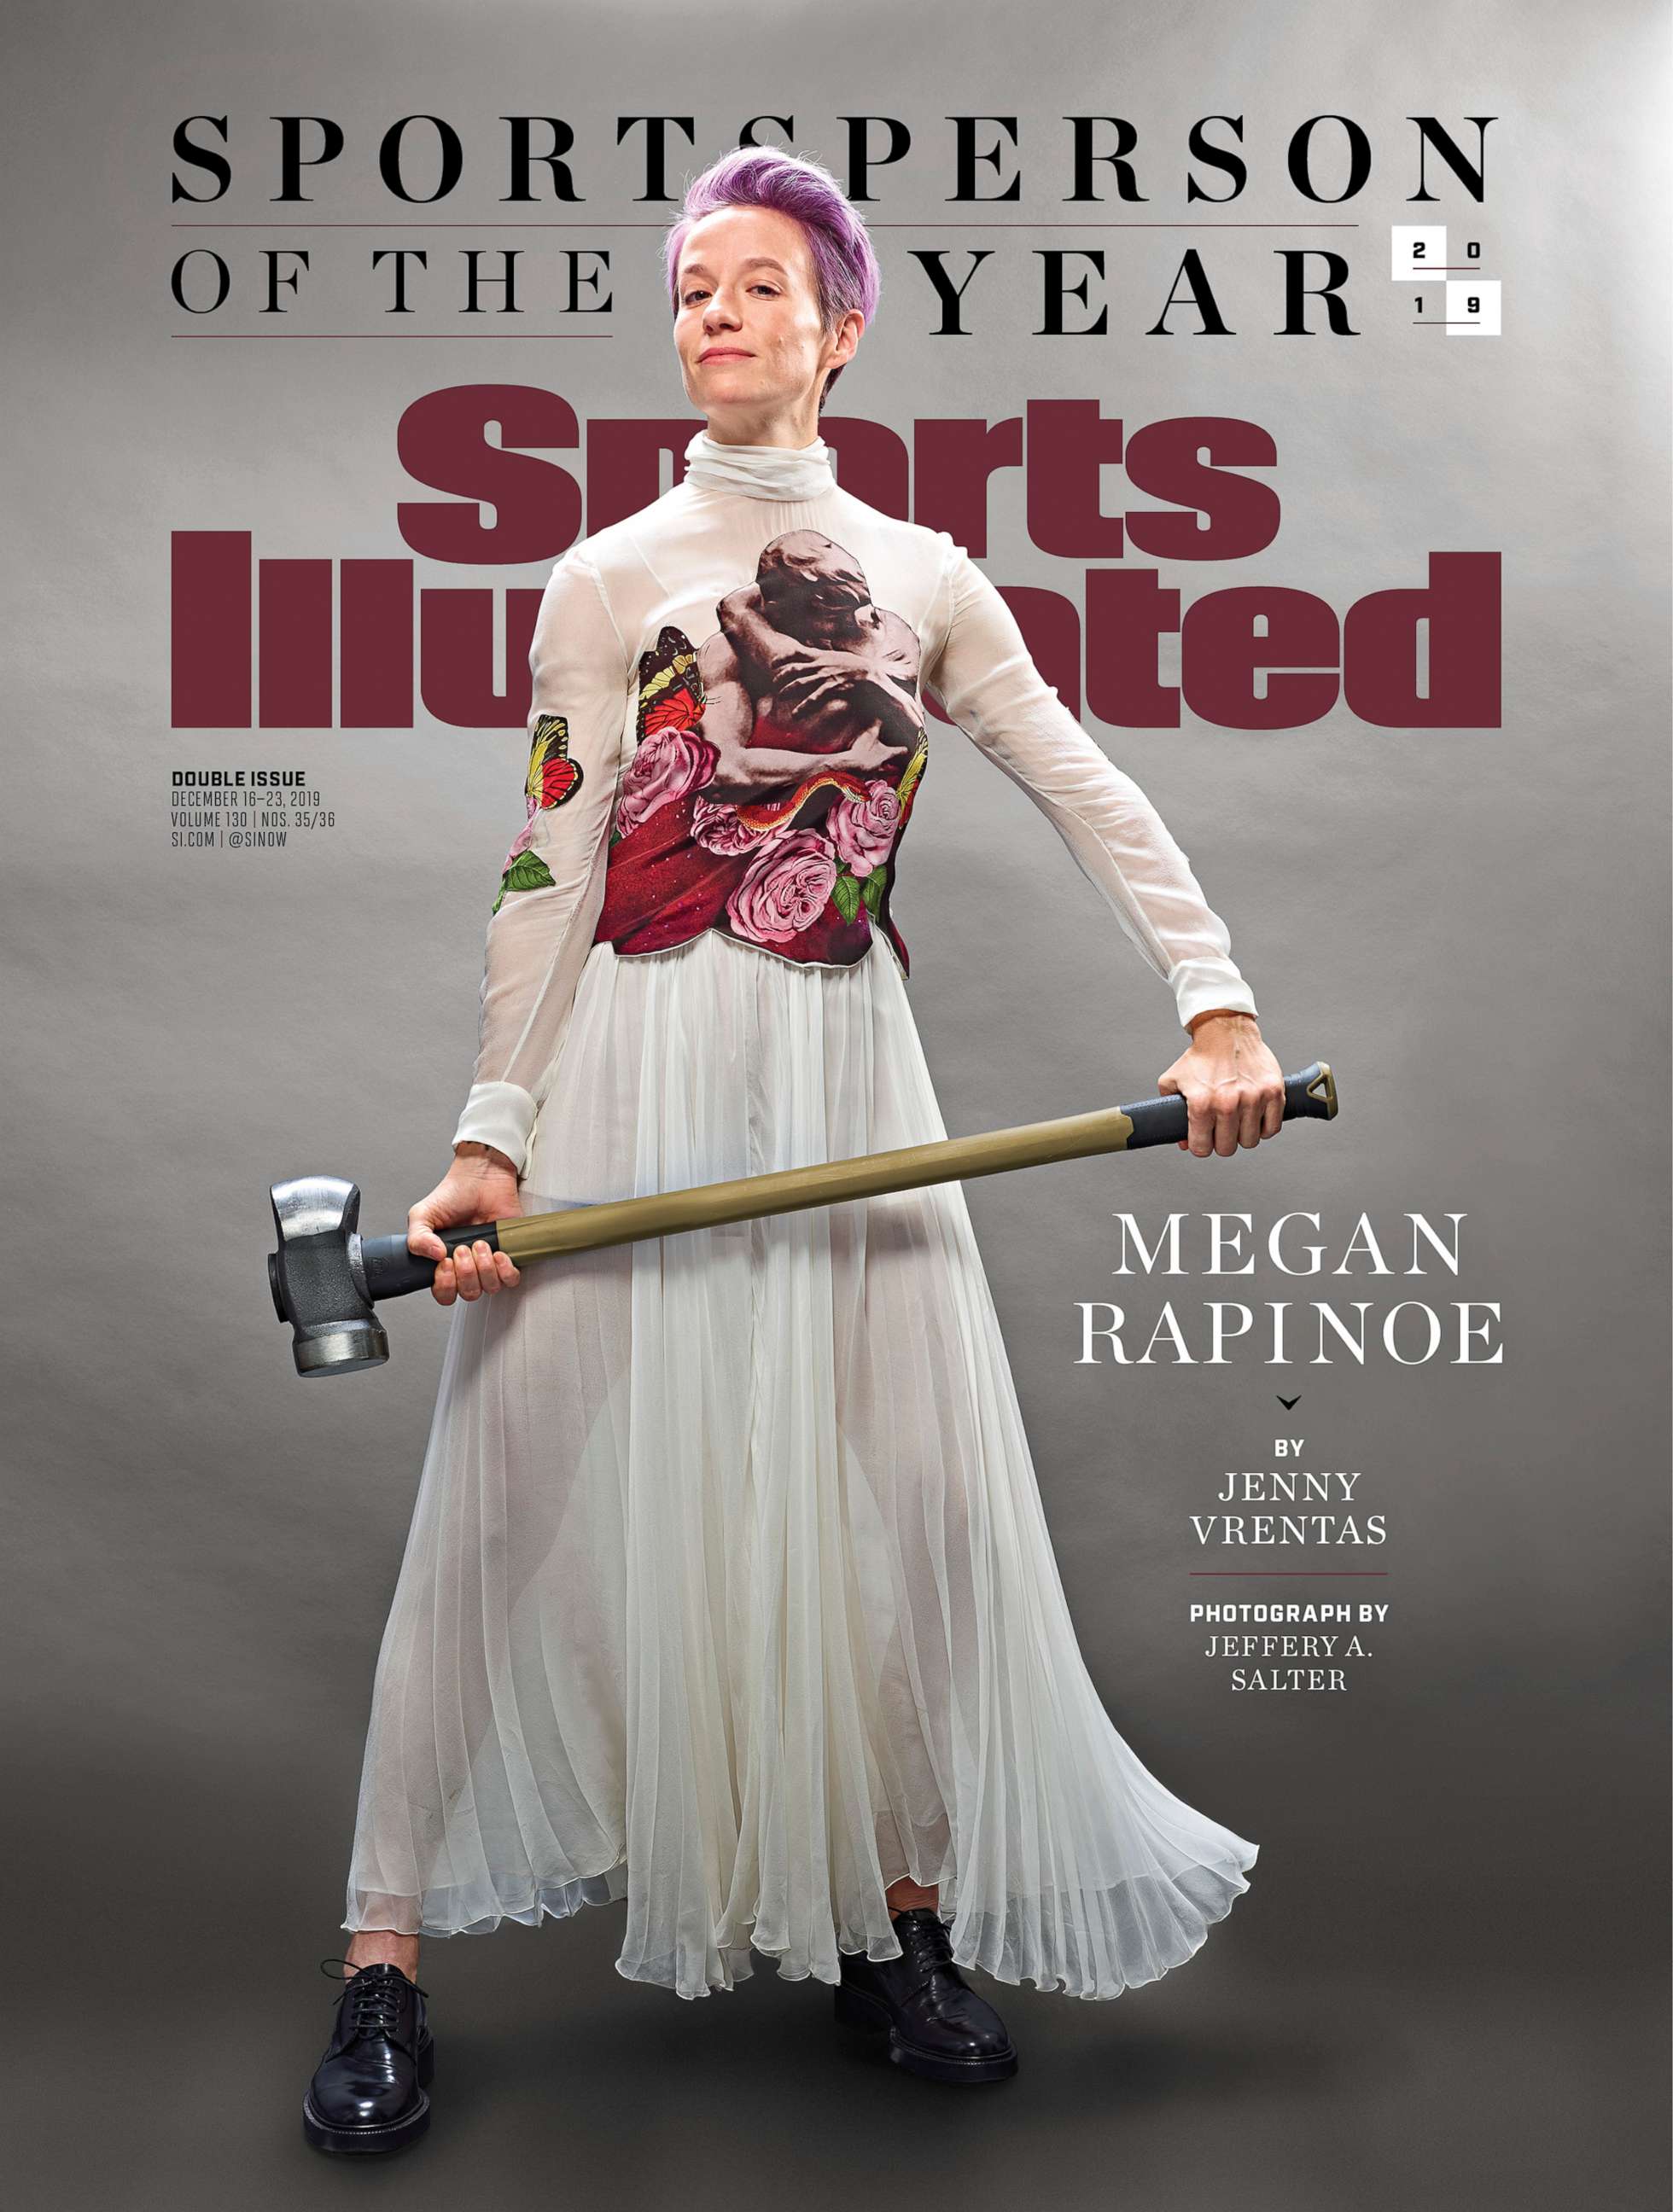 PHOTO: Sports Illustrated announced, Dec. 8, 2019, that two-time World Cup Champion and co-captain of the US Women's National Team Megan Rapinoe has been named 2019 Sportsperson of the Year. 